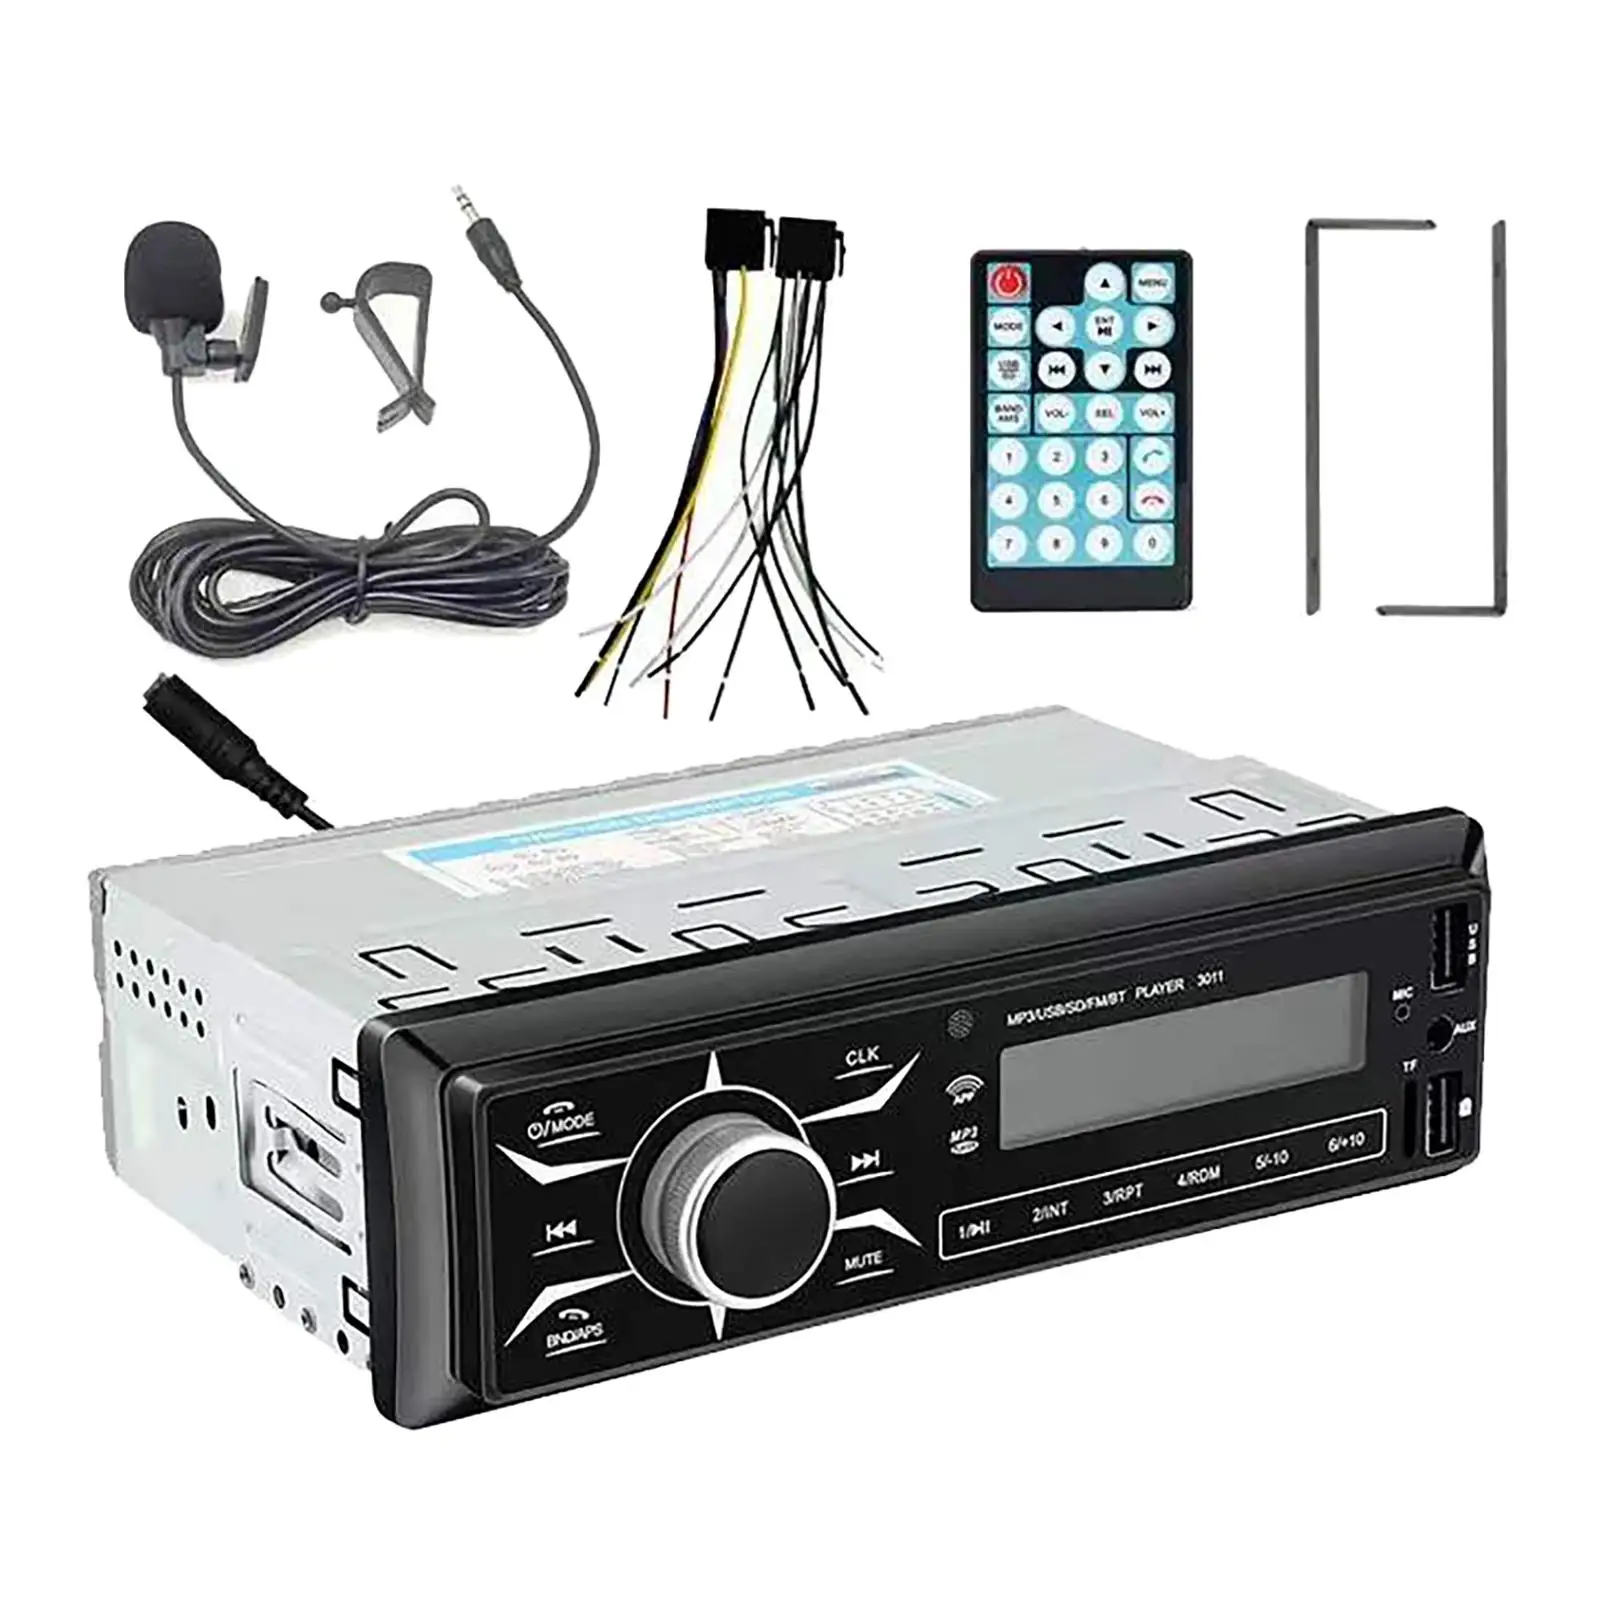 Bluetooth 4.0 Car MP3 Player 24V FM Radio Hands-Free Calling Audio Stereo Voice Assistant Music Transmitter for Vehicles Cars